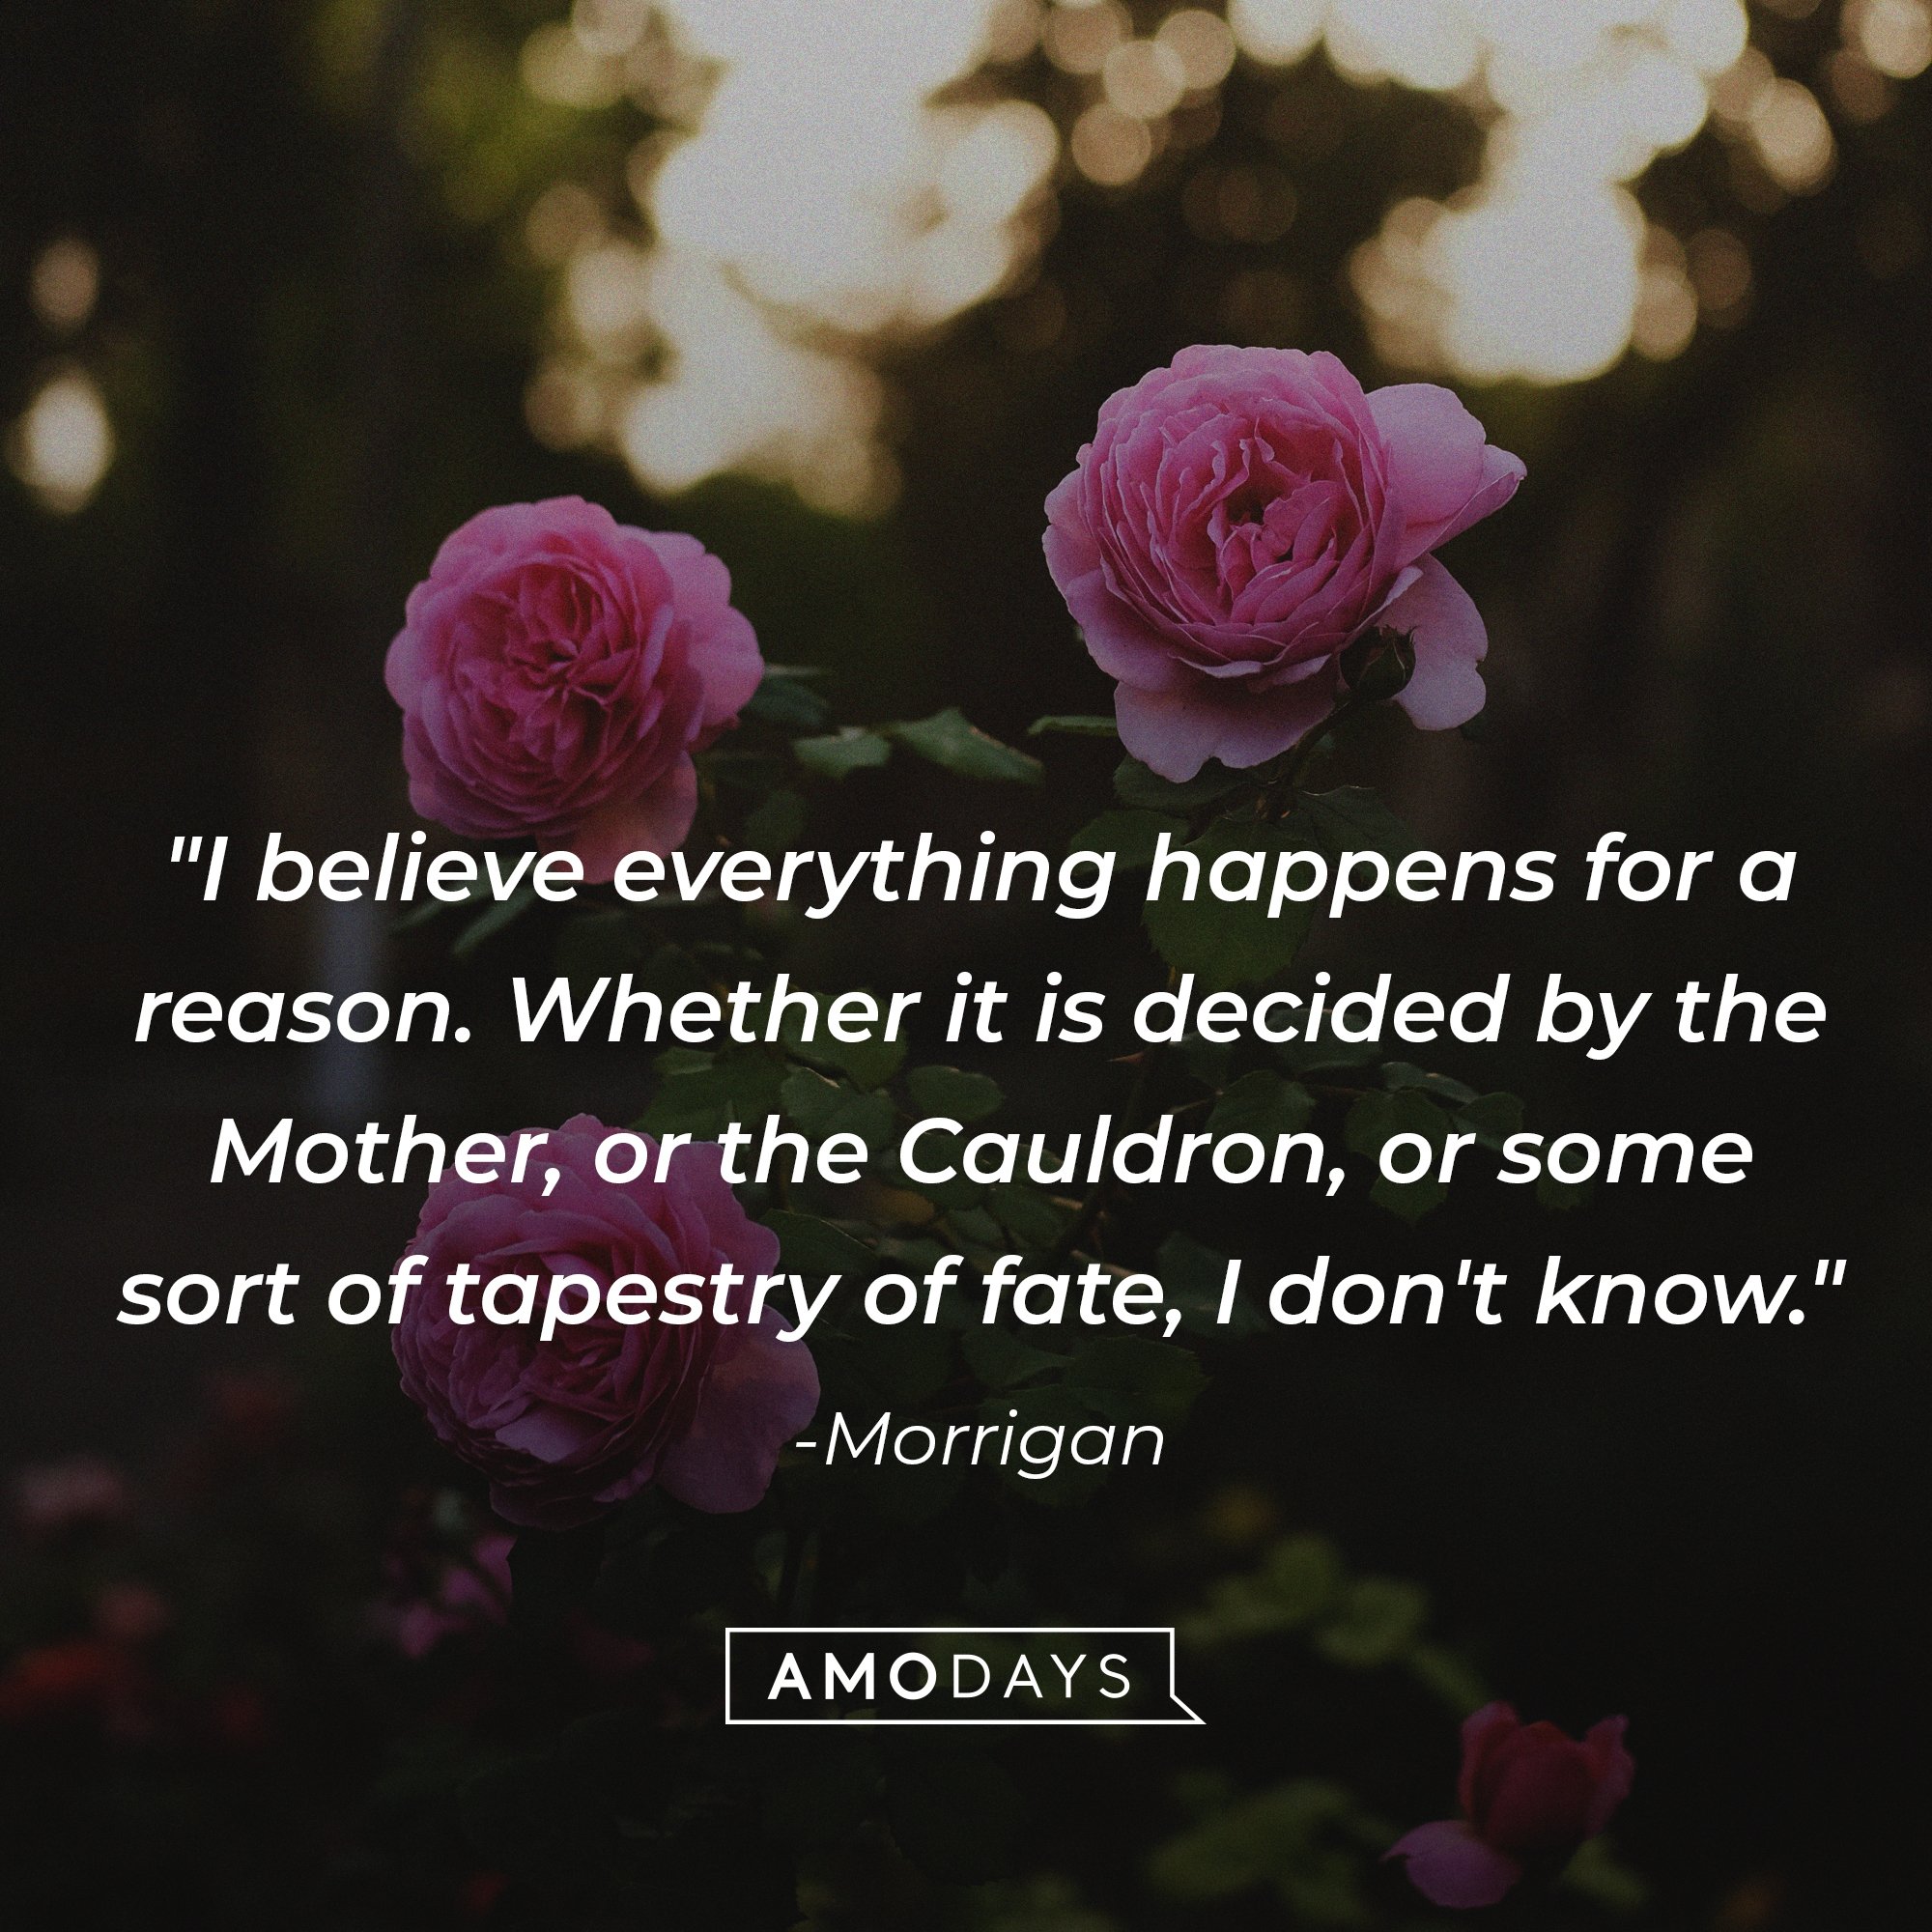  Morrigan’s quote: "I believe everything happens for a reason. Whether it is decided by the Mother, or the Cauldron, or some sort of tapestry of fate, I don't know."  | Image: AmoDays